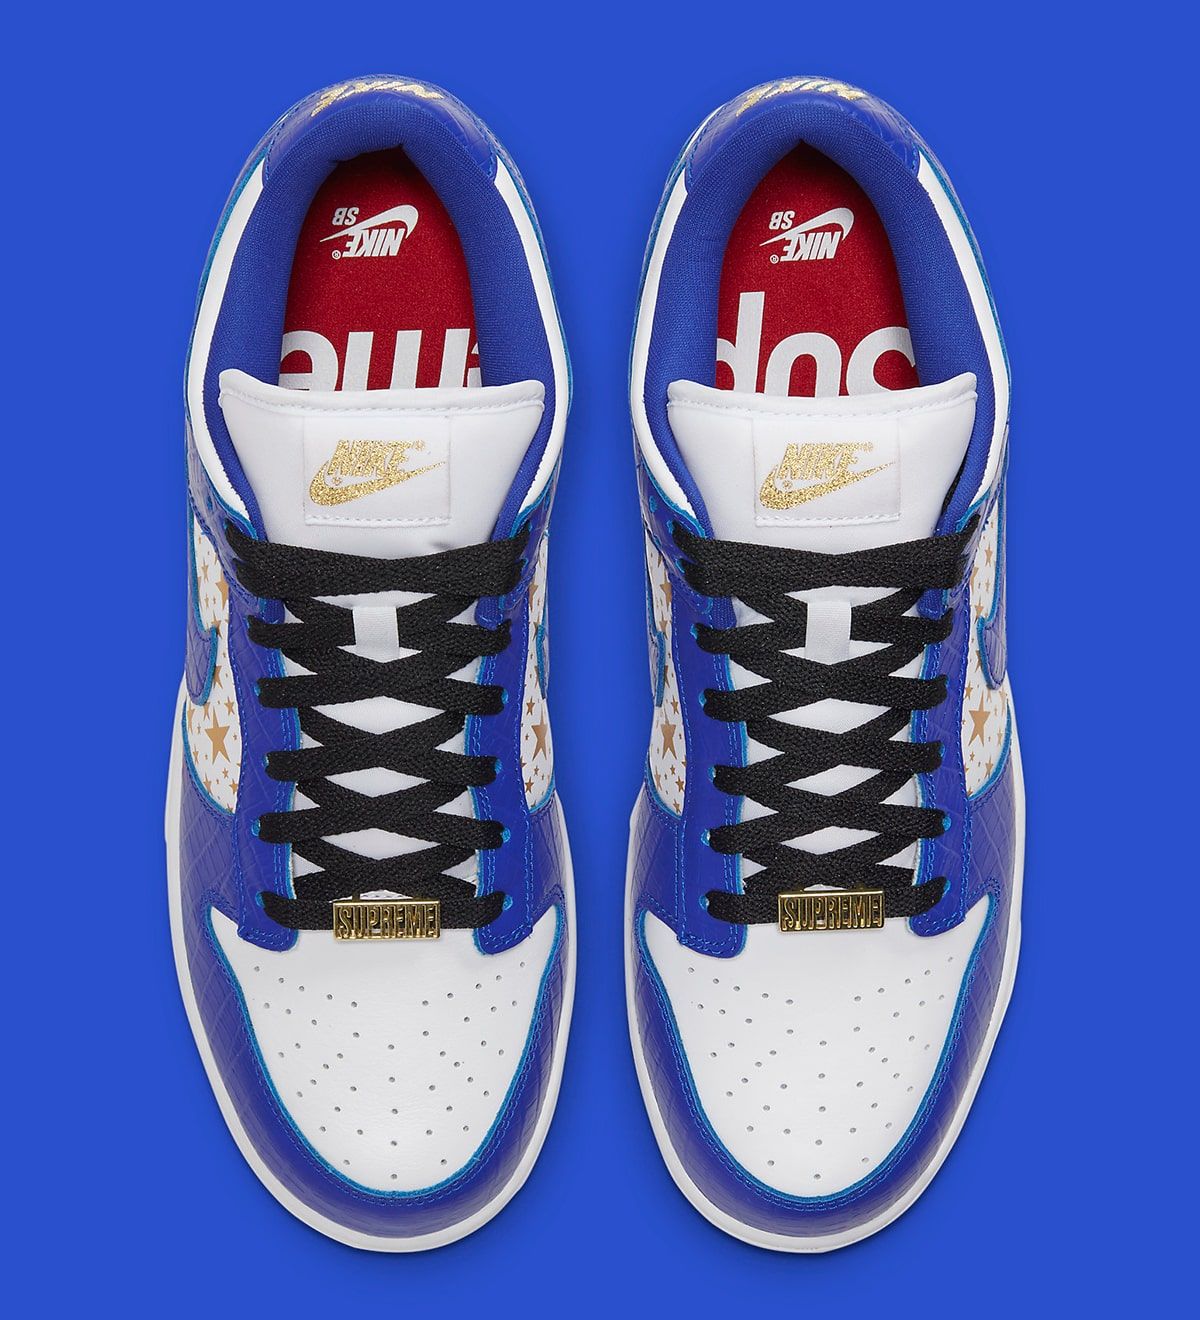 Supreme x Nike SB Dunk Low "Stars" Earmarked for March 4th Release | HOUSE  OF HEAT